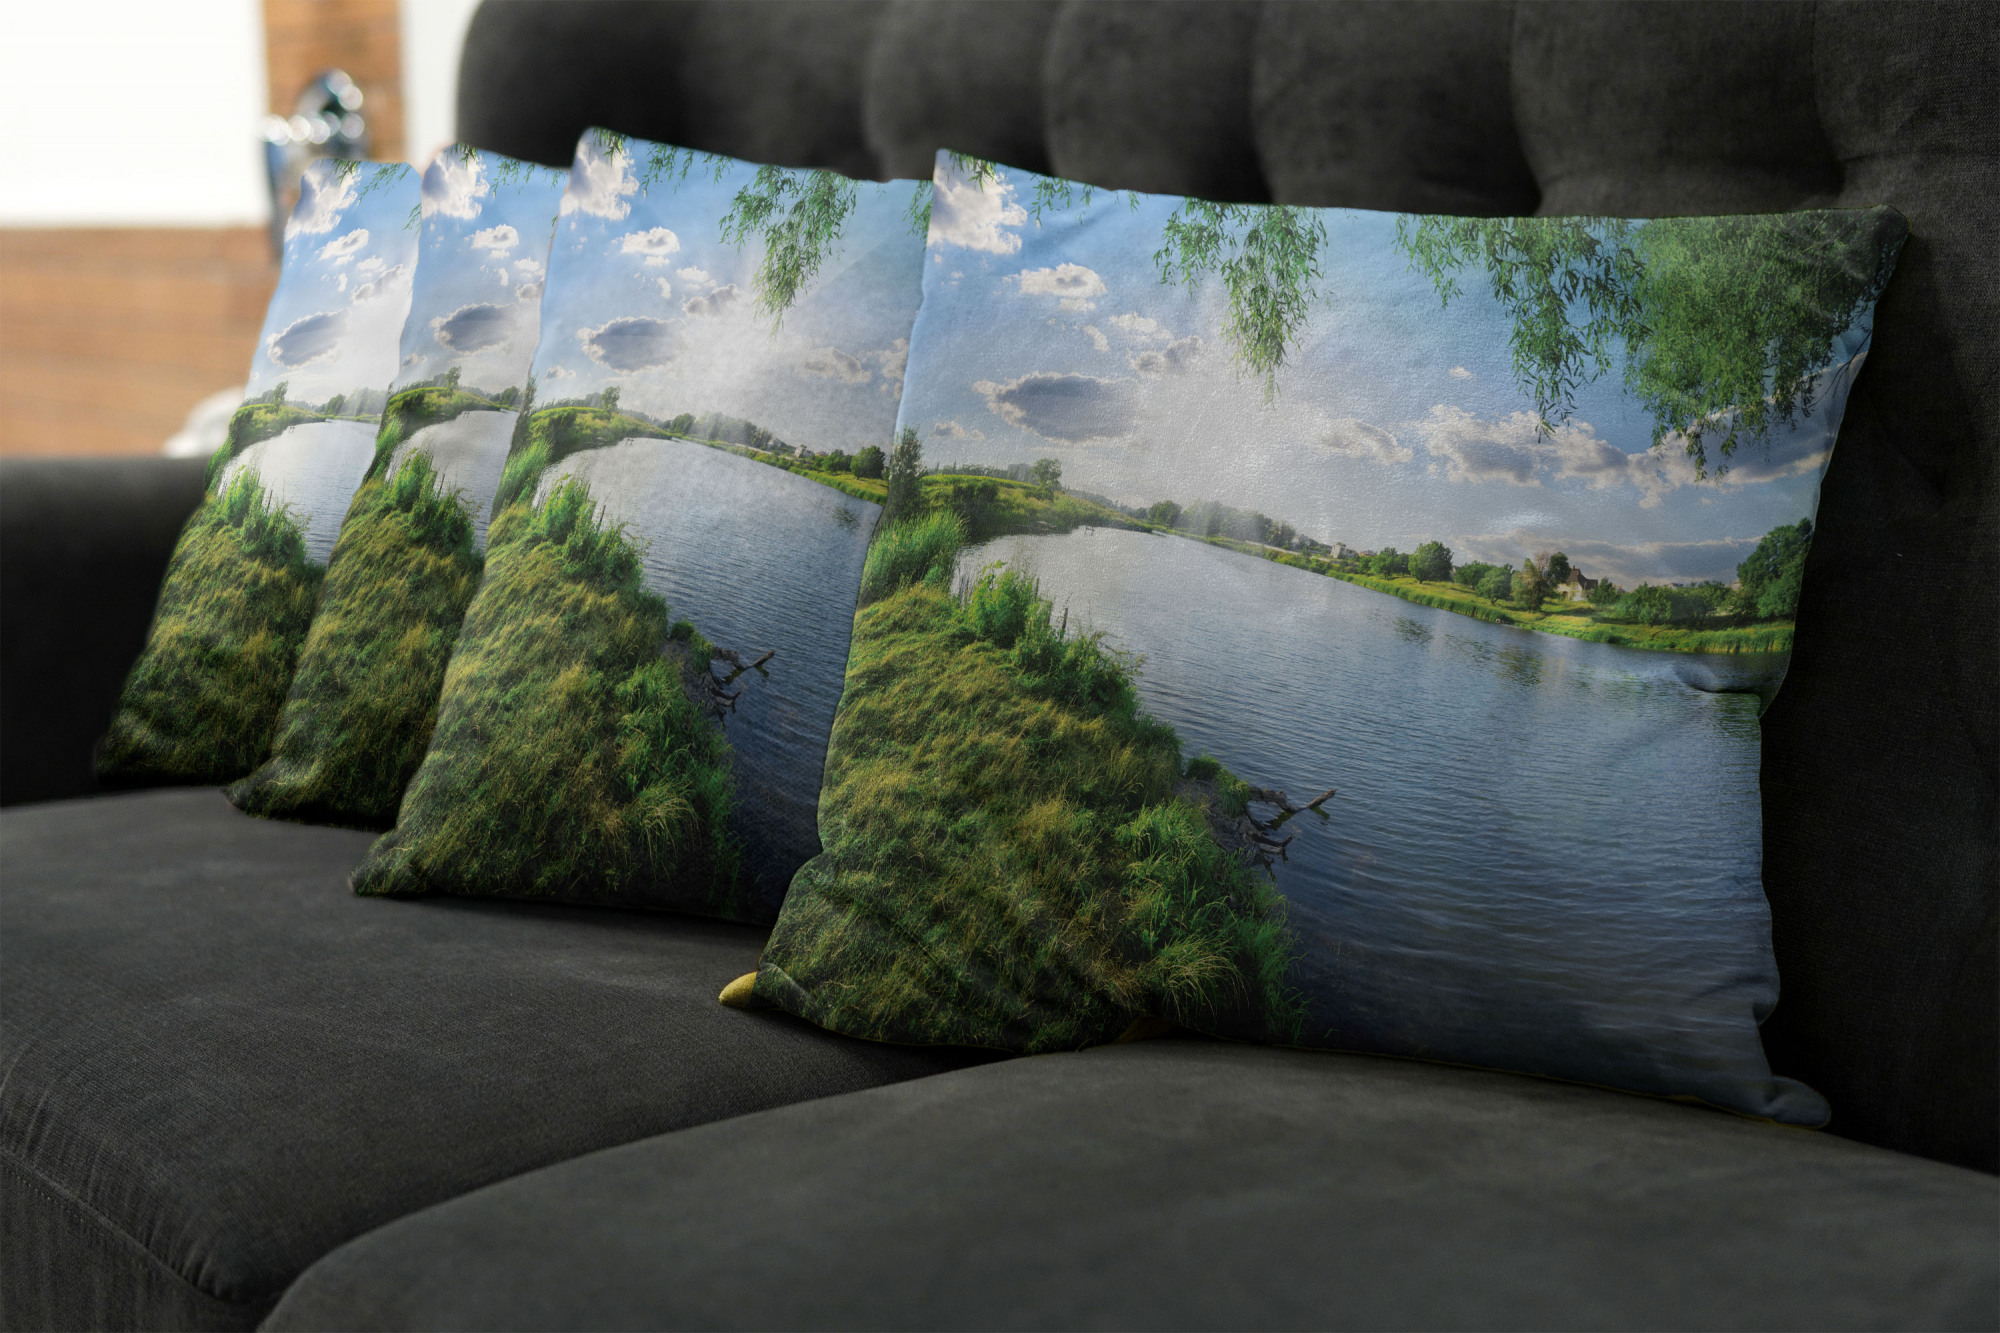 Nature Throw Pillow Cushion Case Pack of 4, Sunny Day on a Calm River in Summer Sunshines Greenery Grass Outdoors Cloud, Modern Accent Double-Sided Print, 4 Sizes, Fern Green Sky Blue, by Ambesonne - image 2 of 6